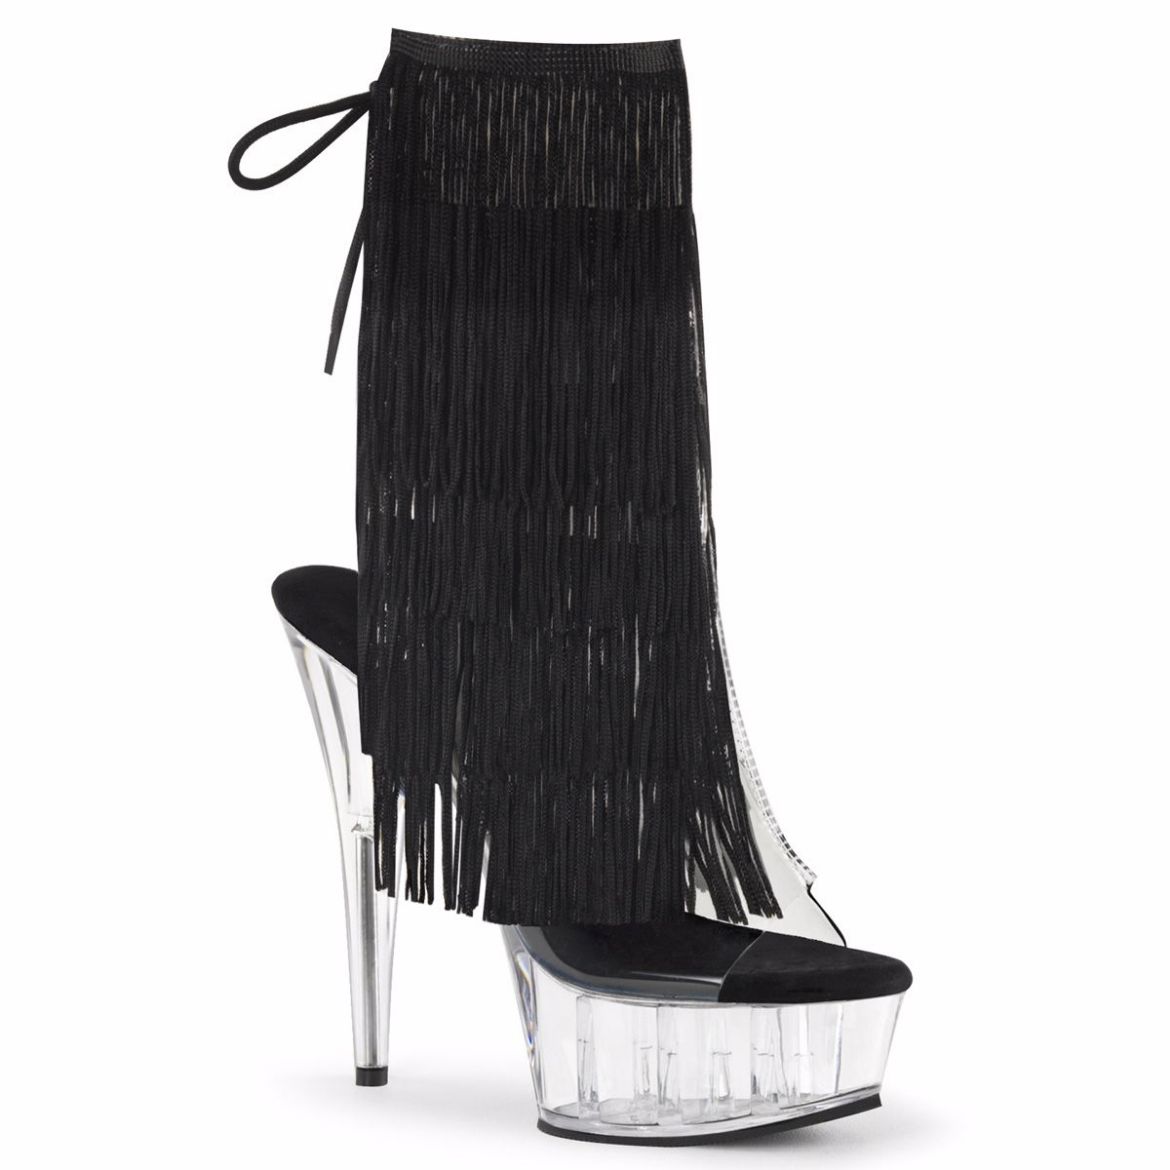 Product image of Pleaser Delight-1017Tf Clear-Black/Clear, 6 inch (15.2 cm) Heel, 1 3/4 inch (4.4 cm) Platform Ankle Boot